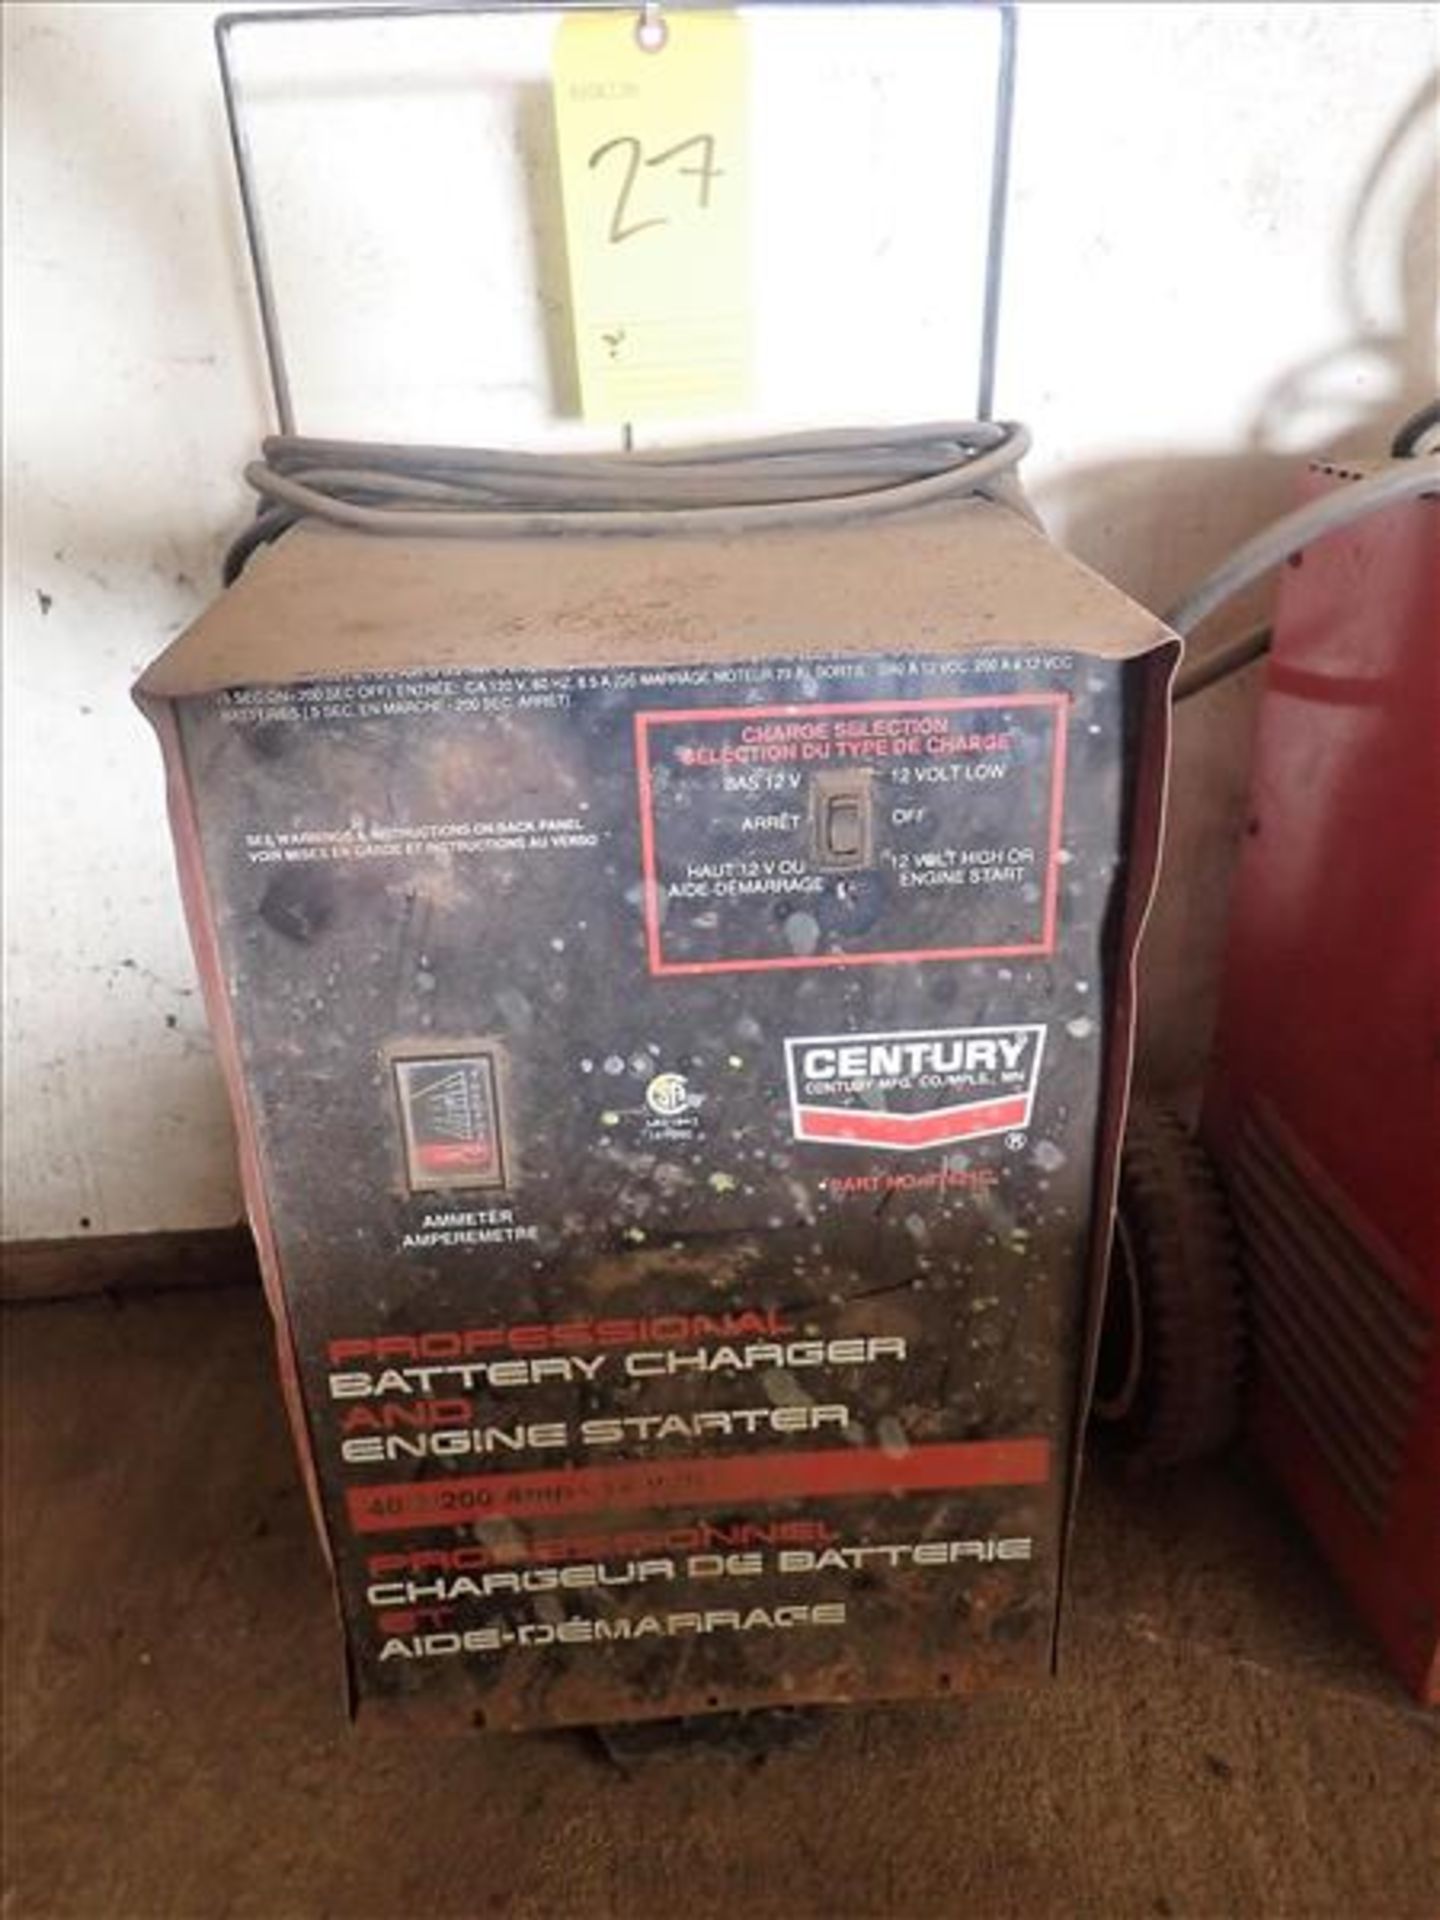 Century 12V battery charger and engine starter (Loc Saint-Sulpice)